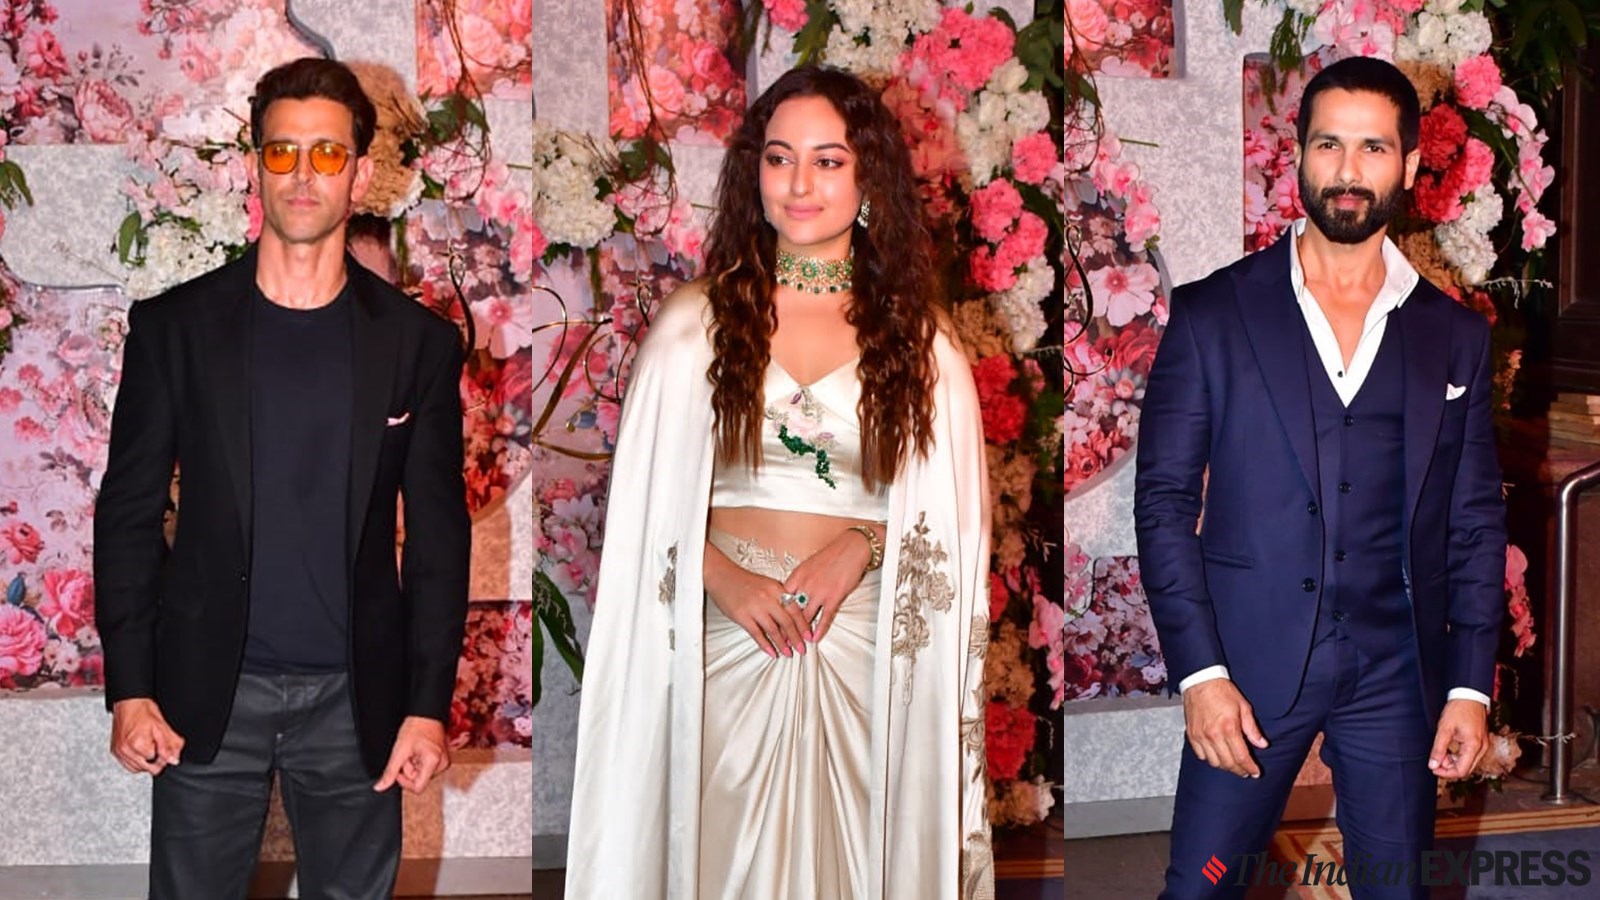 Bollywood stars Hrithik Roshan, Sonakshi Sinha, Shahid Kapoor and others,  attend reception party in glam avatars | Fashion News - The Indian Express